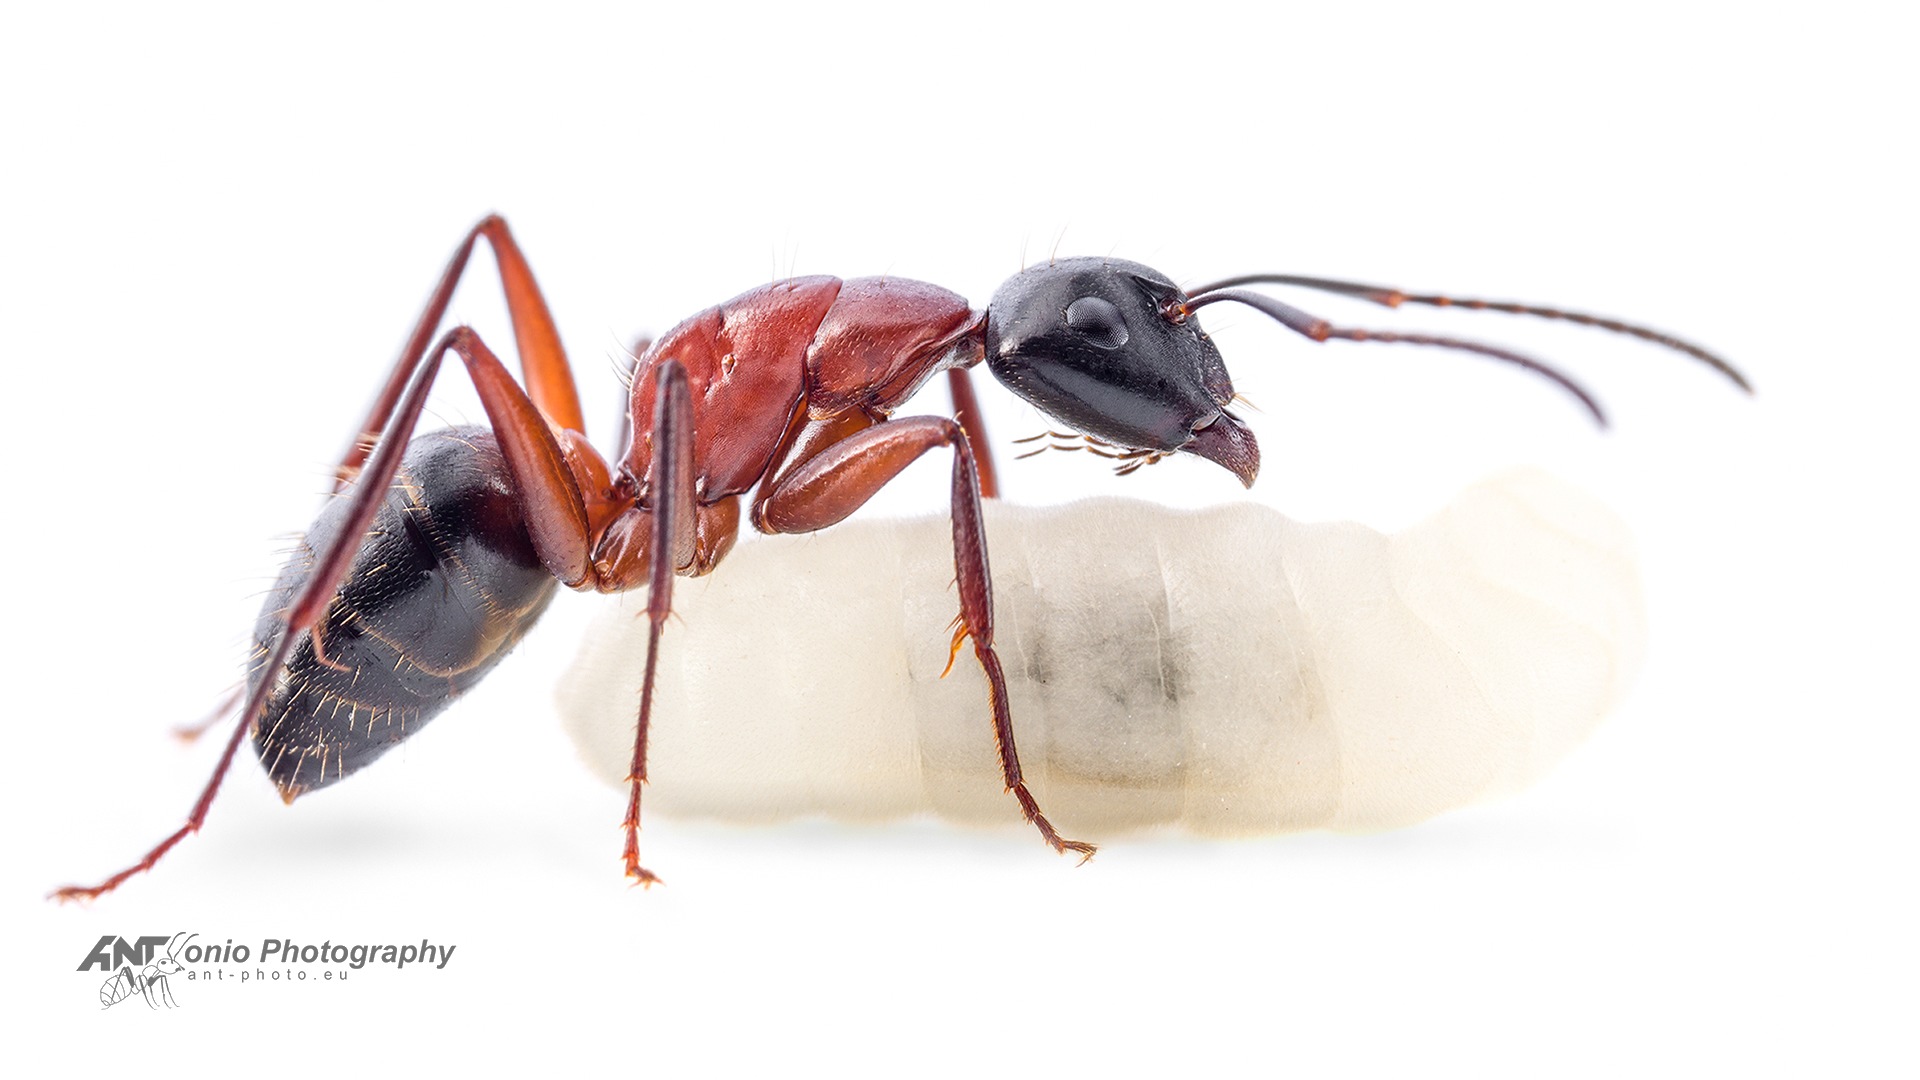 Camponotus ligniperda worker guarding a larva, side view on a white background